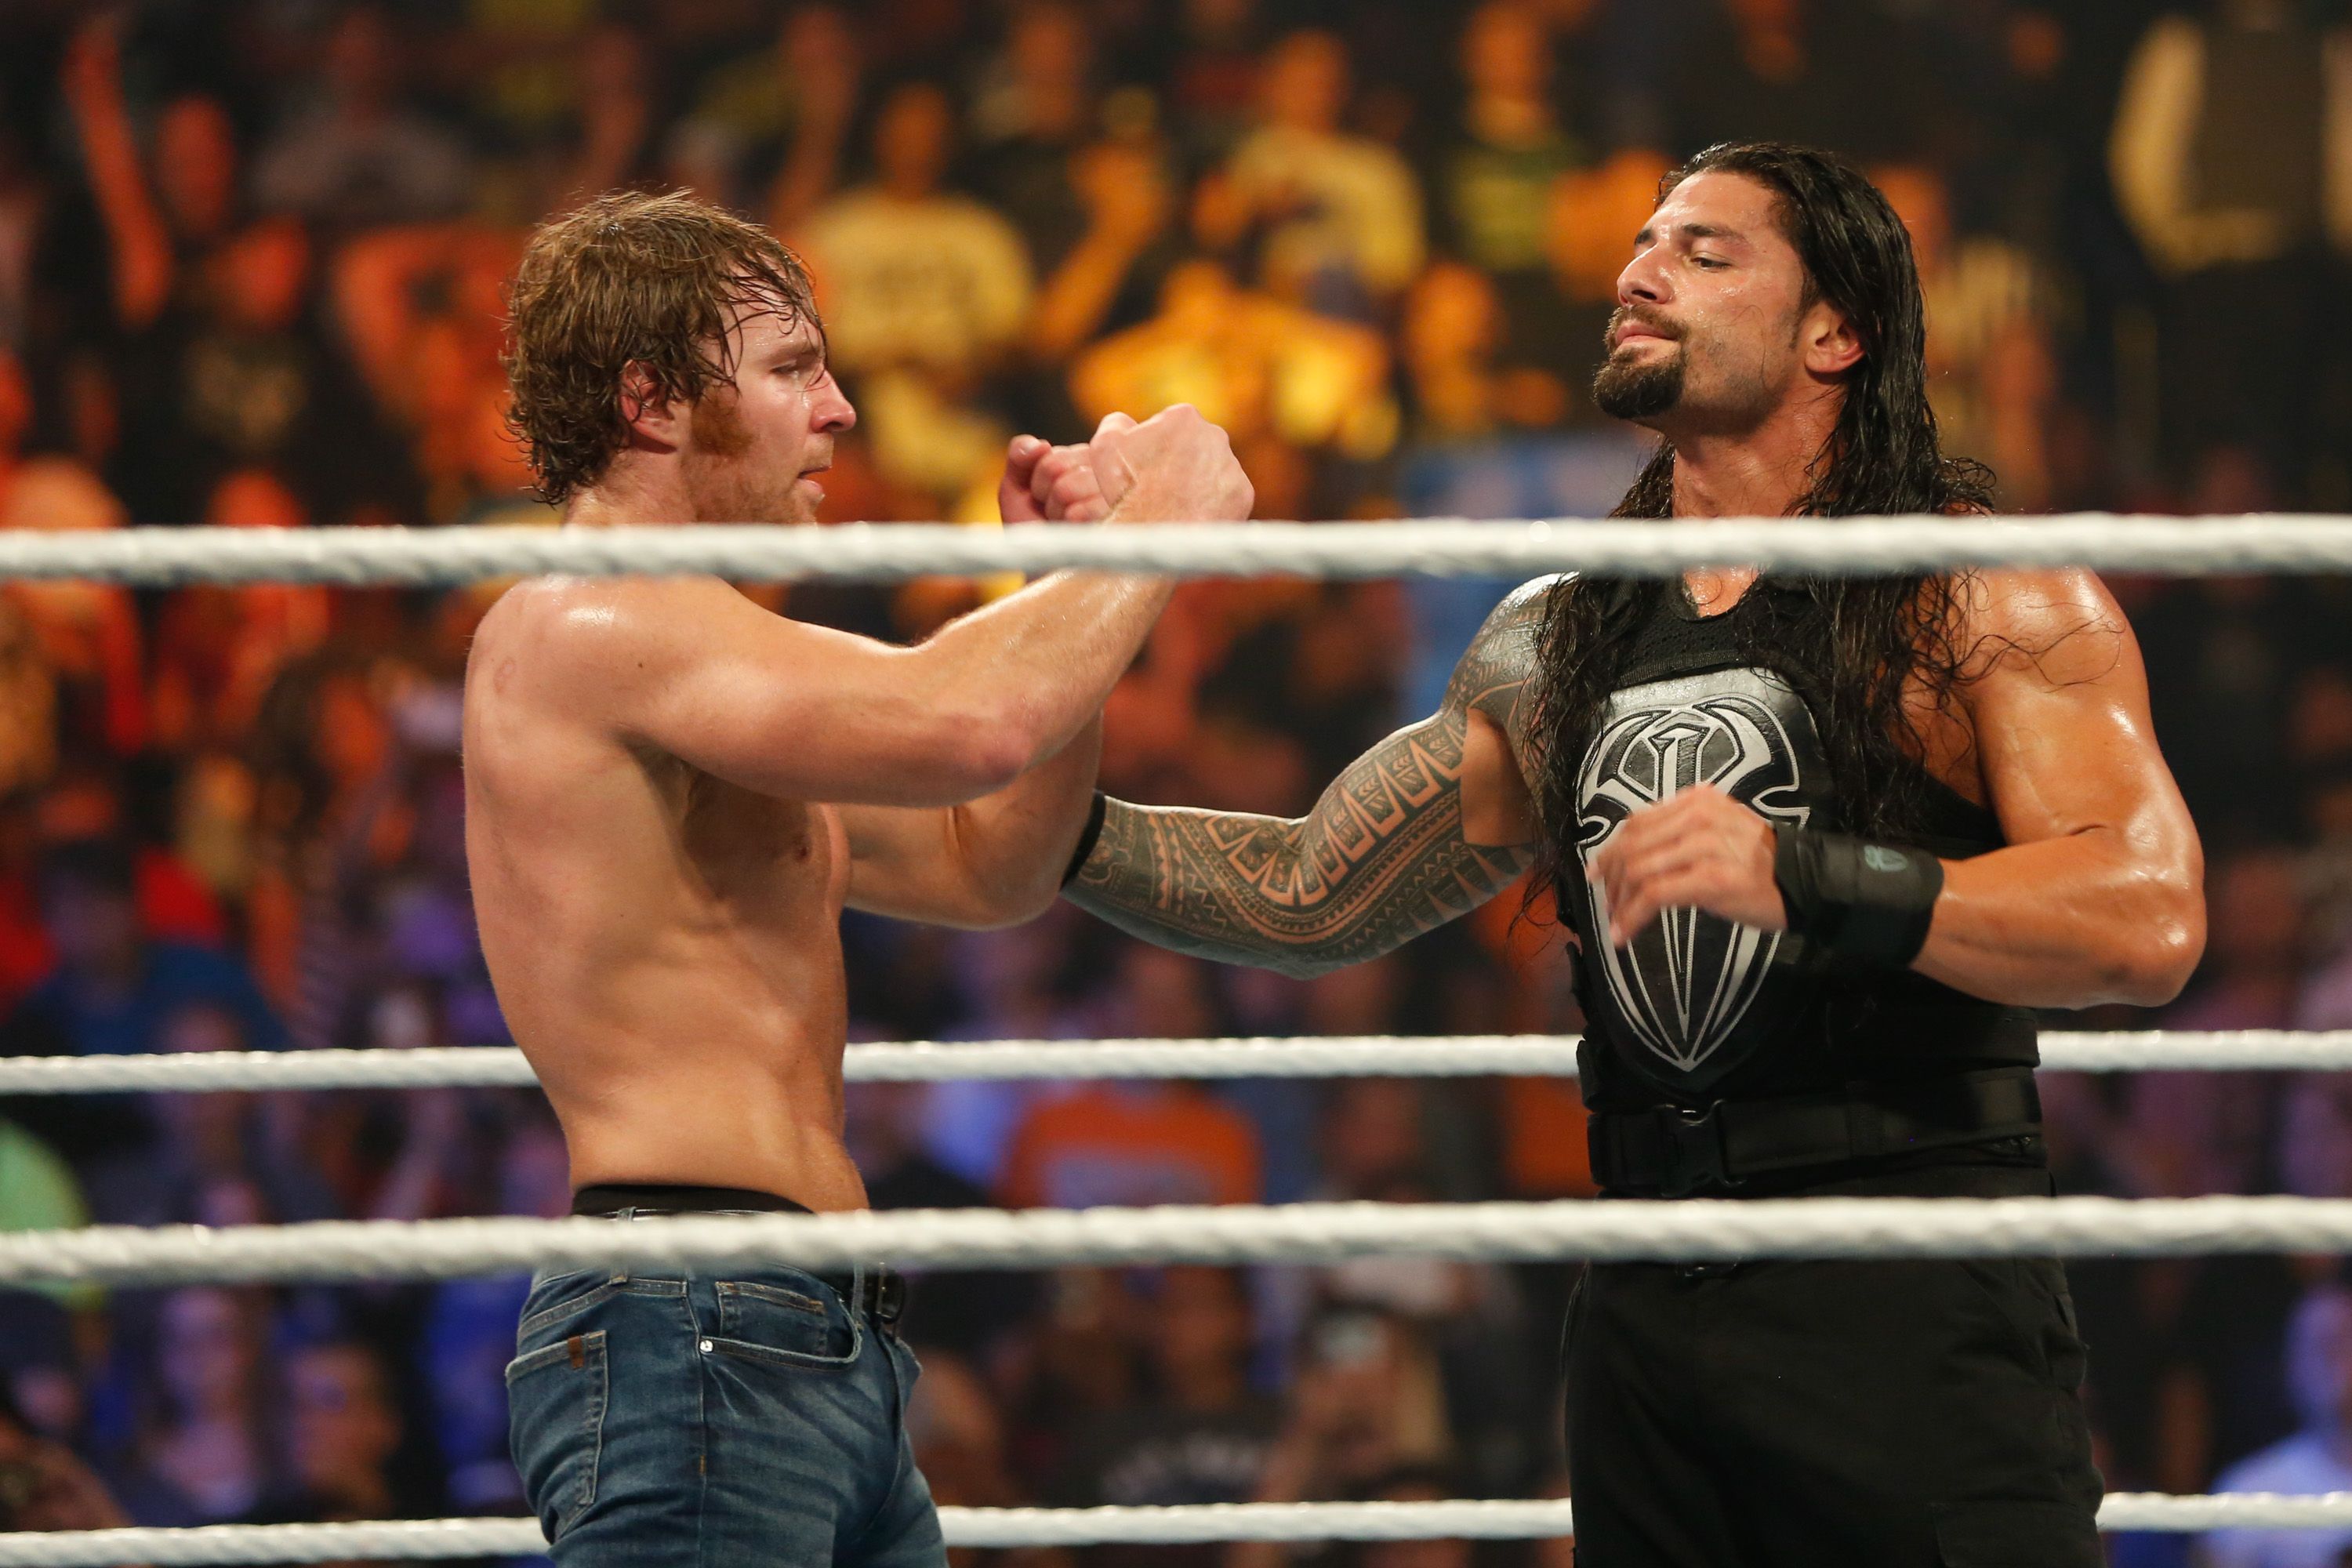 Roman Reigns attacking his opponent